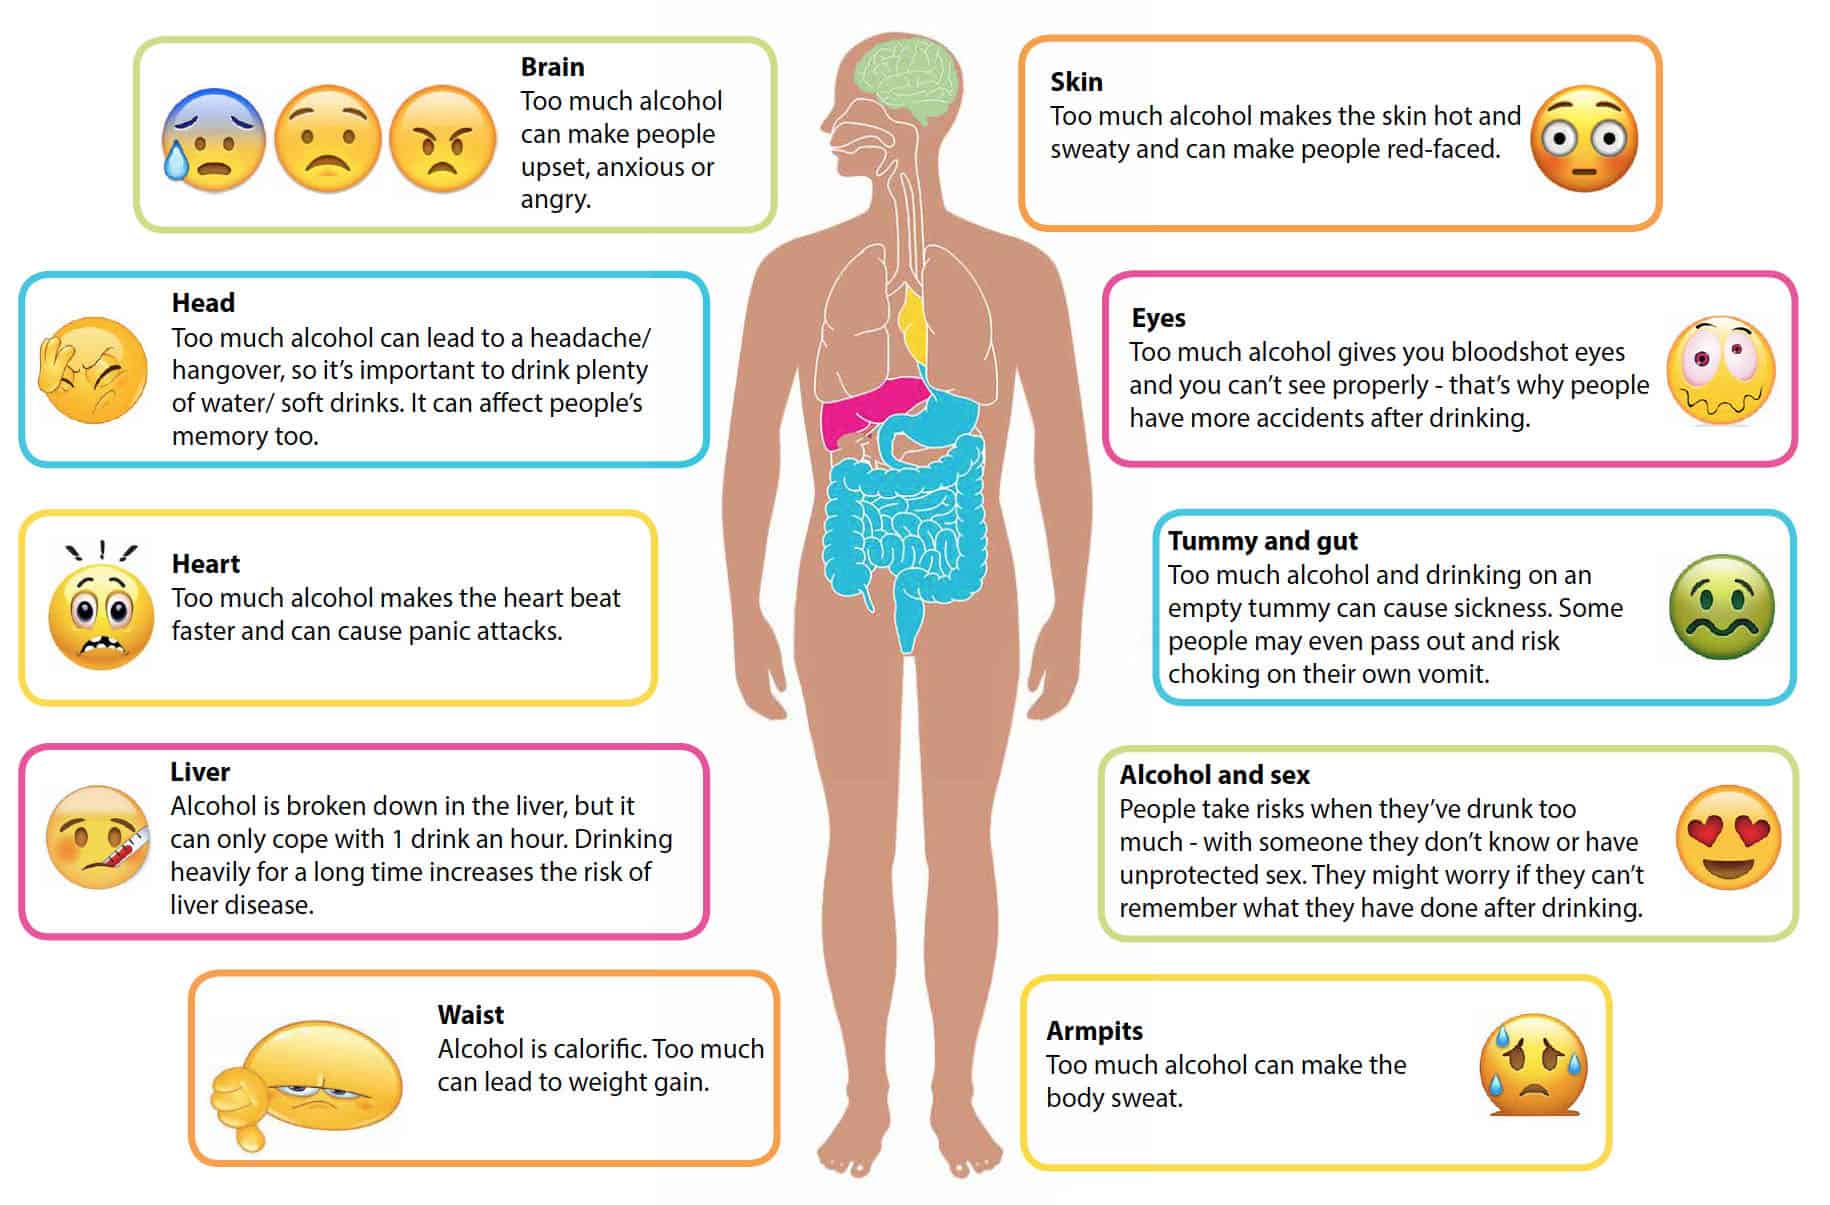 How too much alcohol affects the body